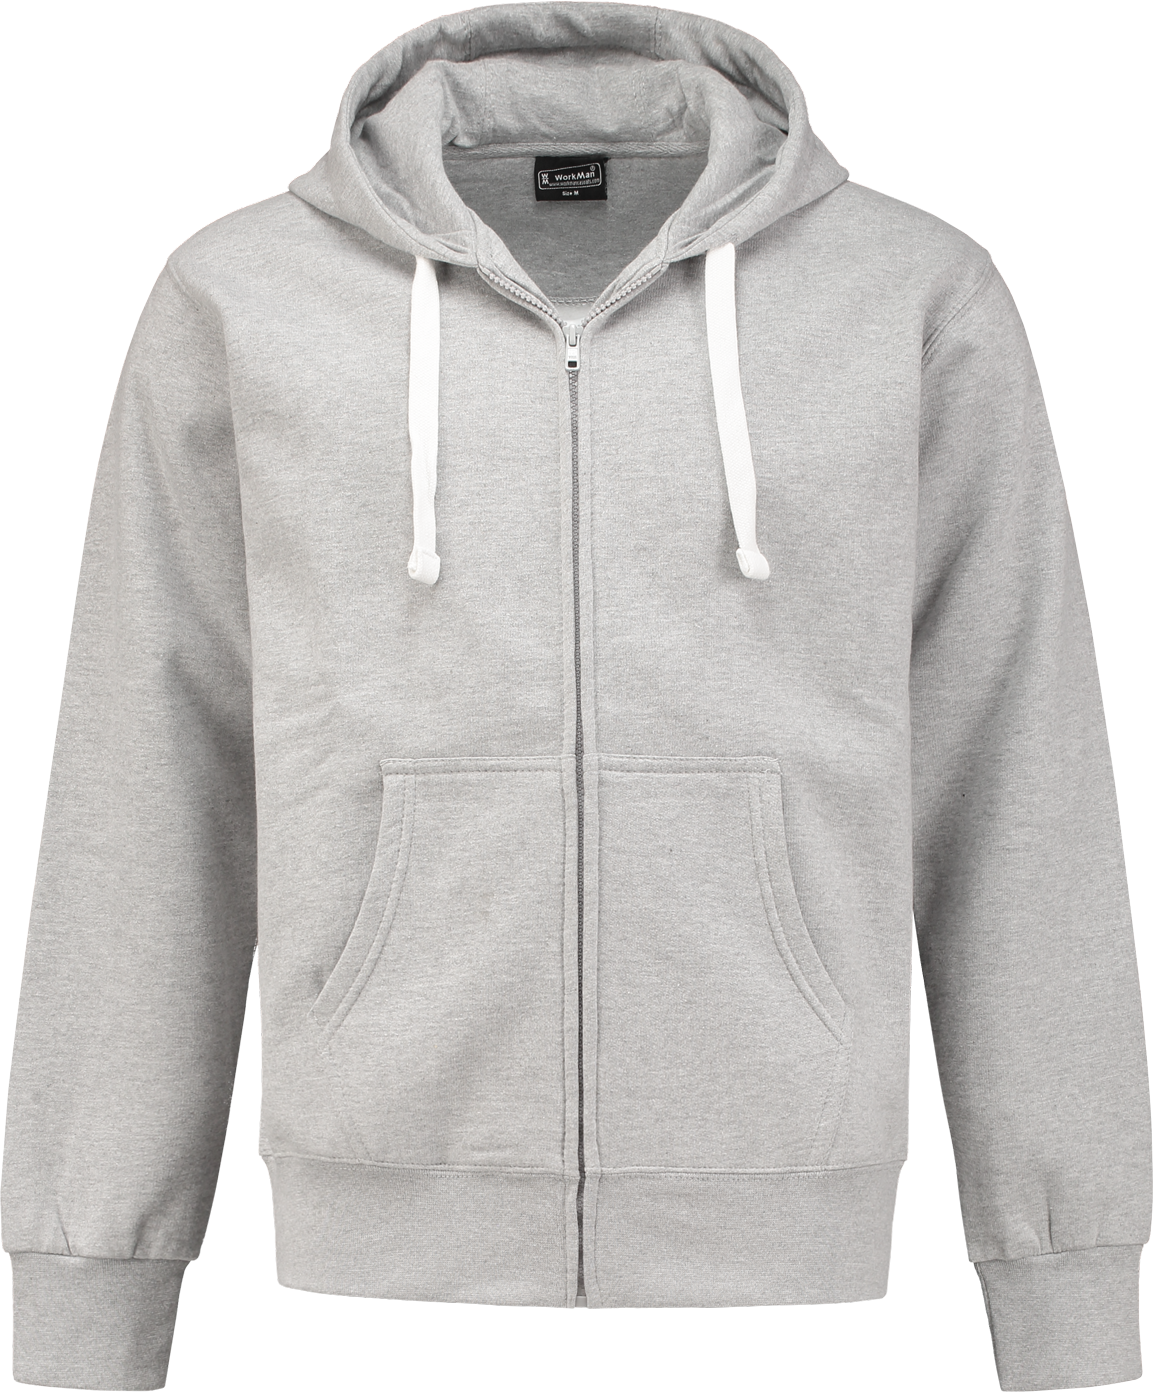 8642 Outfitters Hooded Sweatvest Grey Melange